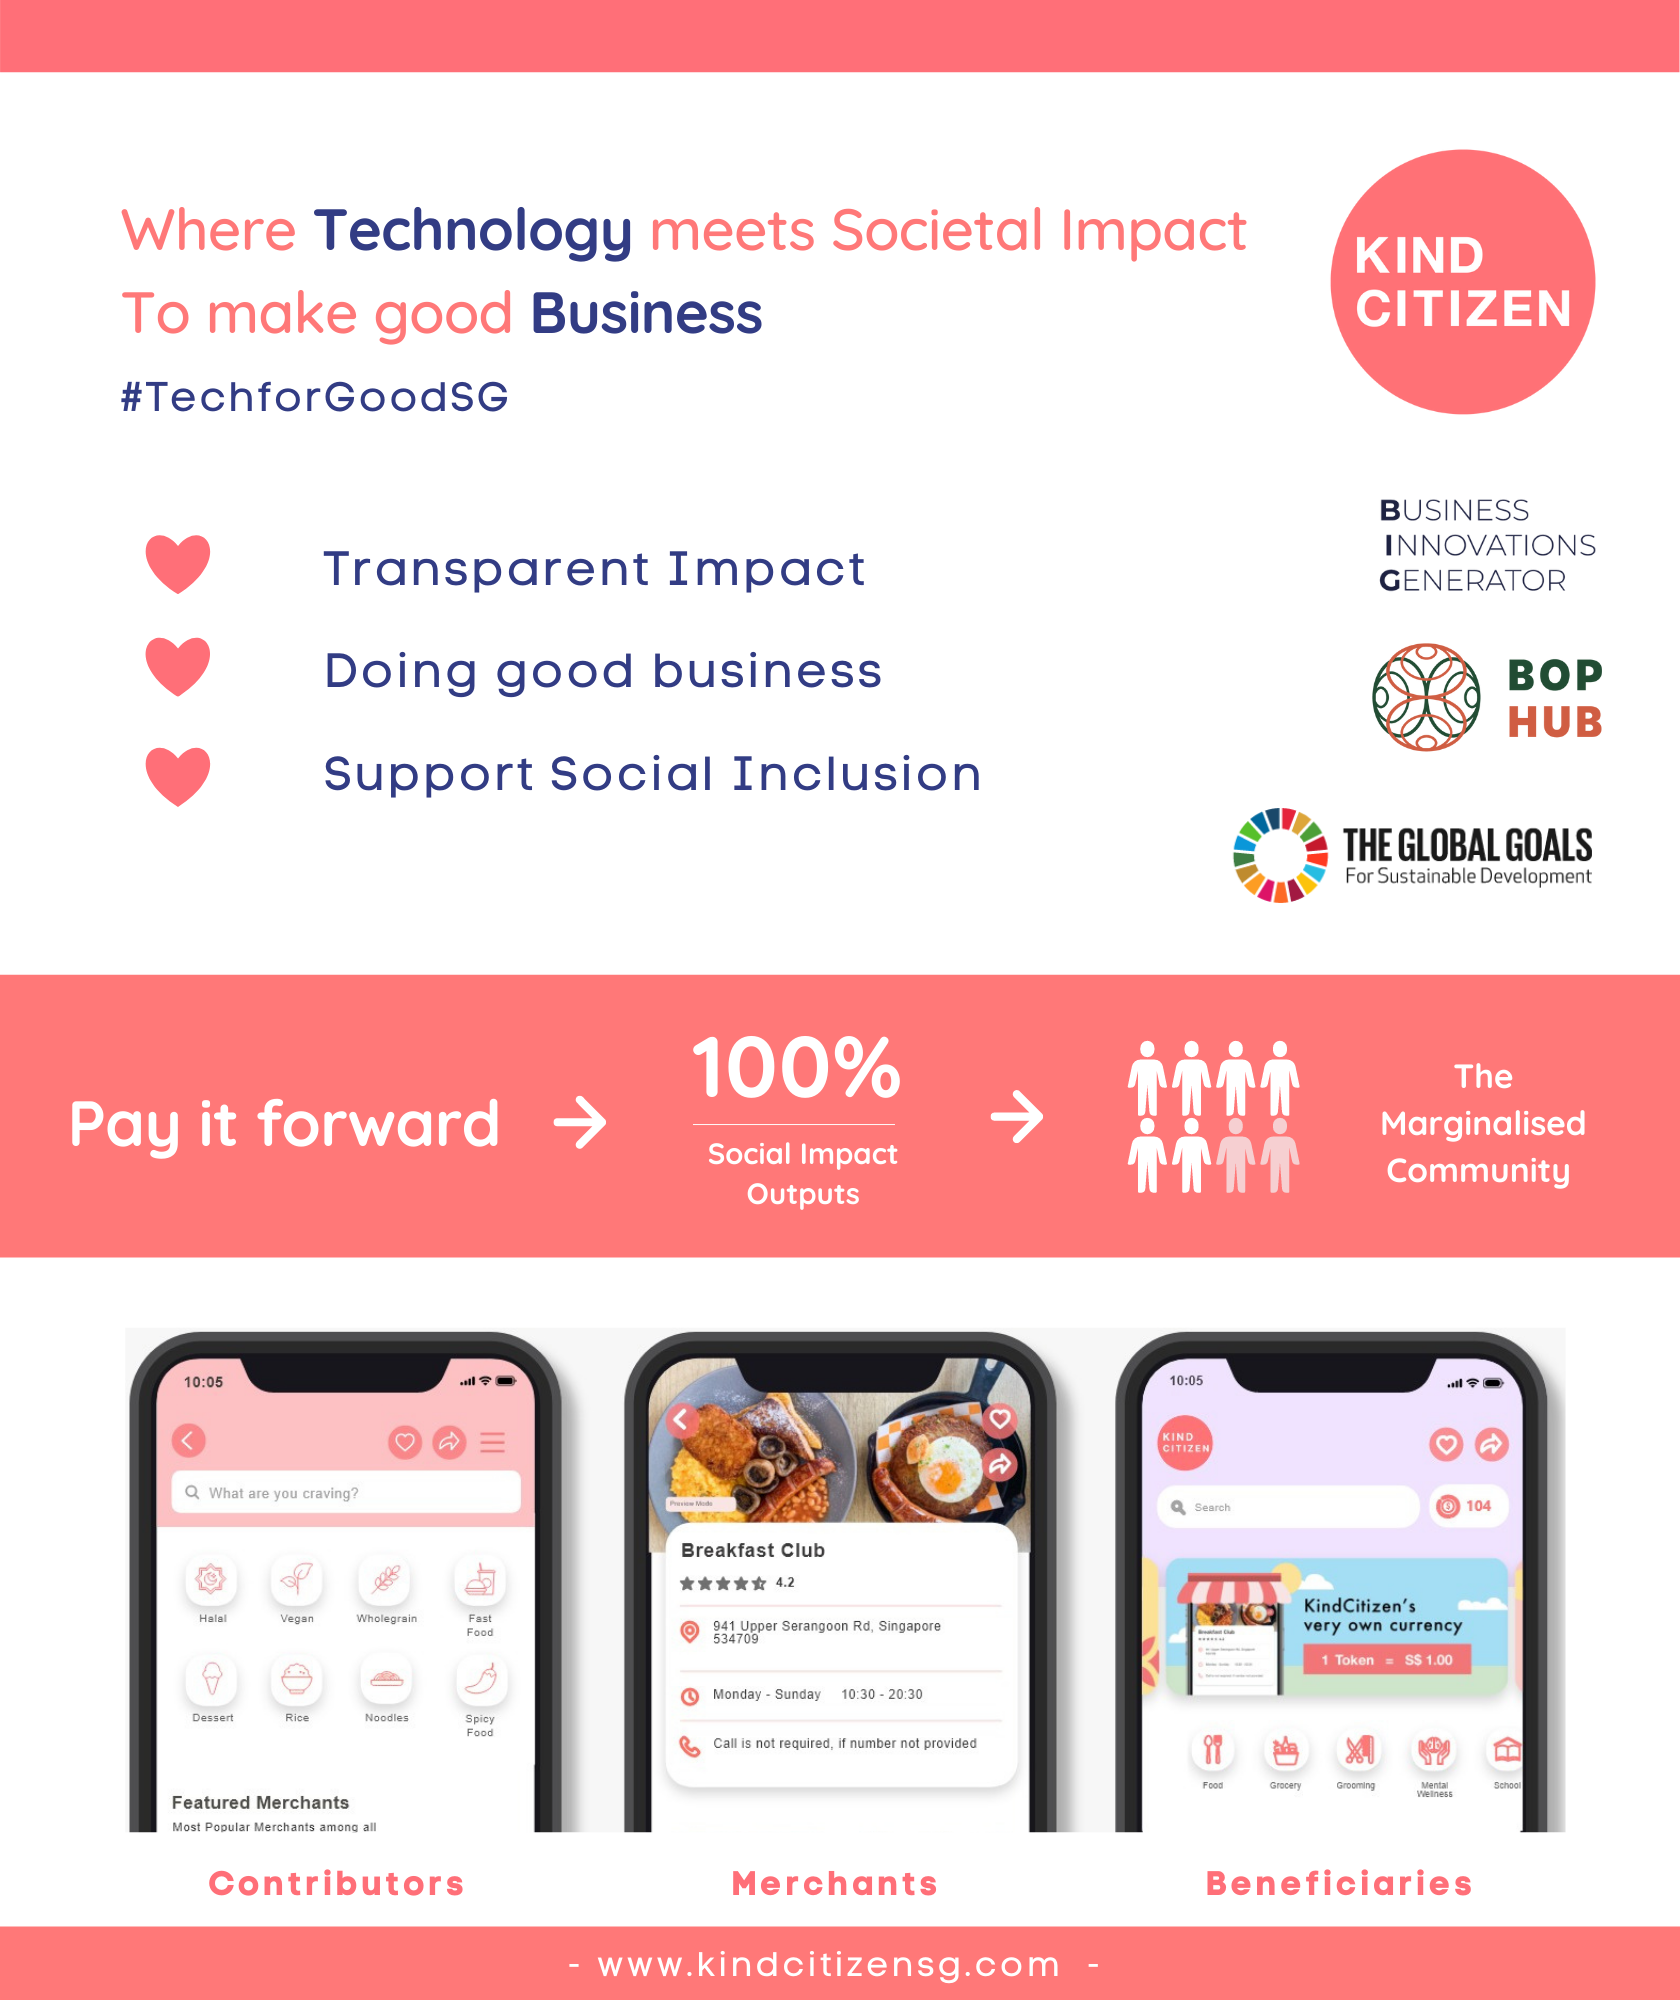 Digital for Life Fund Project: Online poster for Kind Citizen, a social impact marketplace promoting contributions to the underprivileged